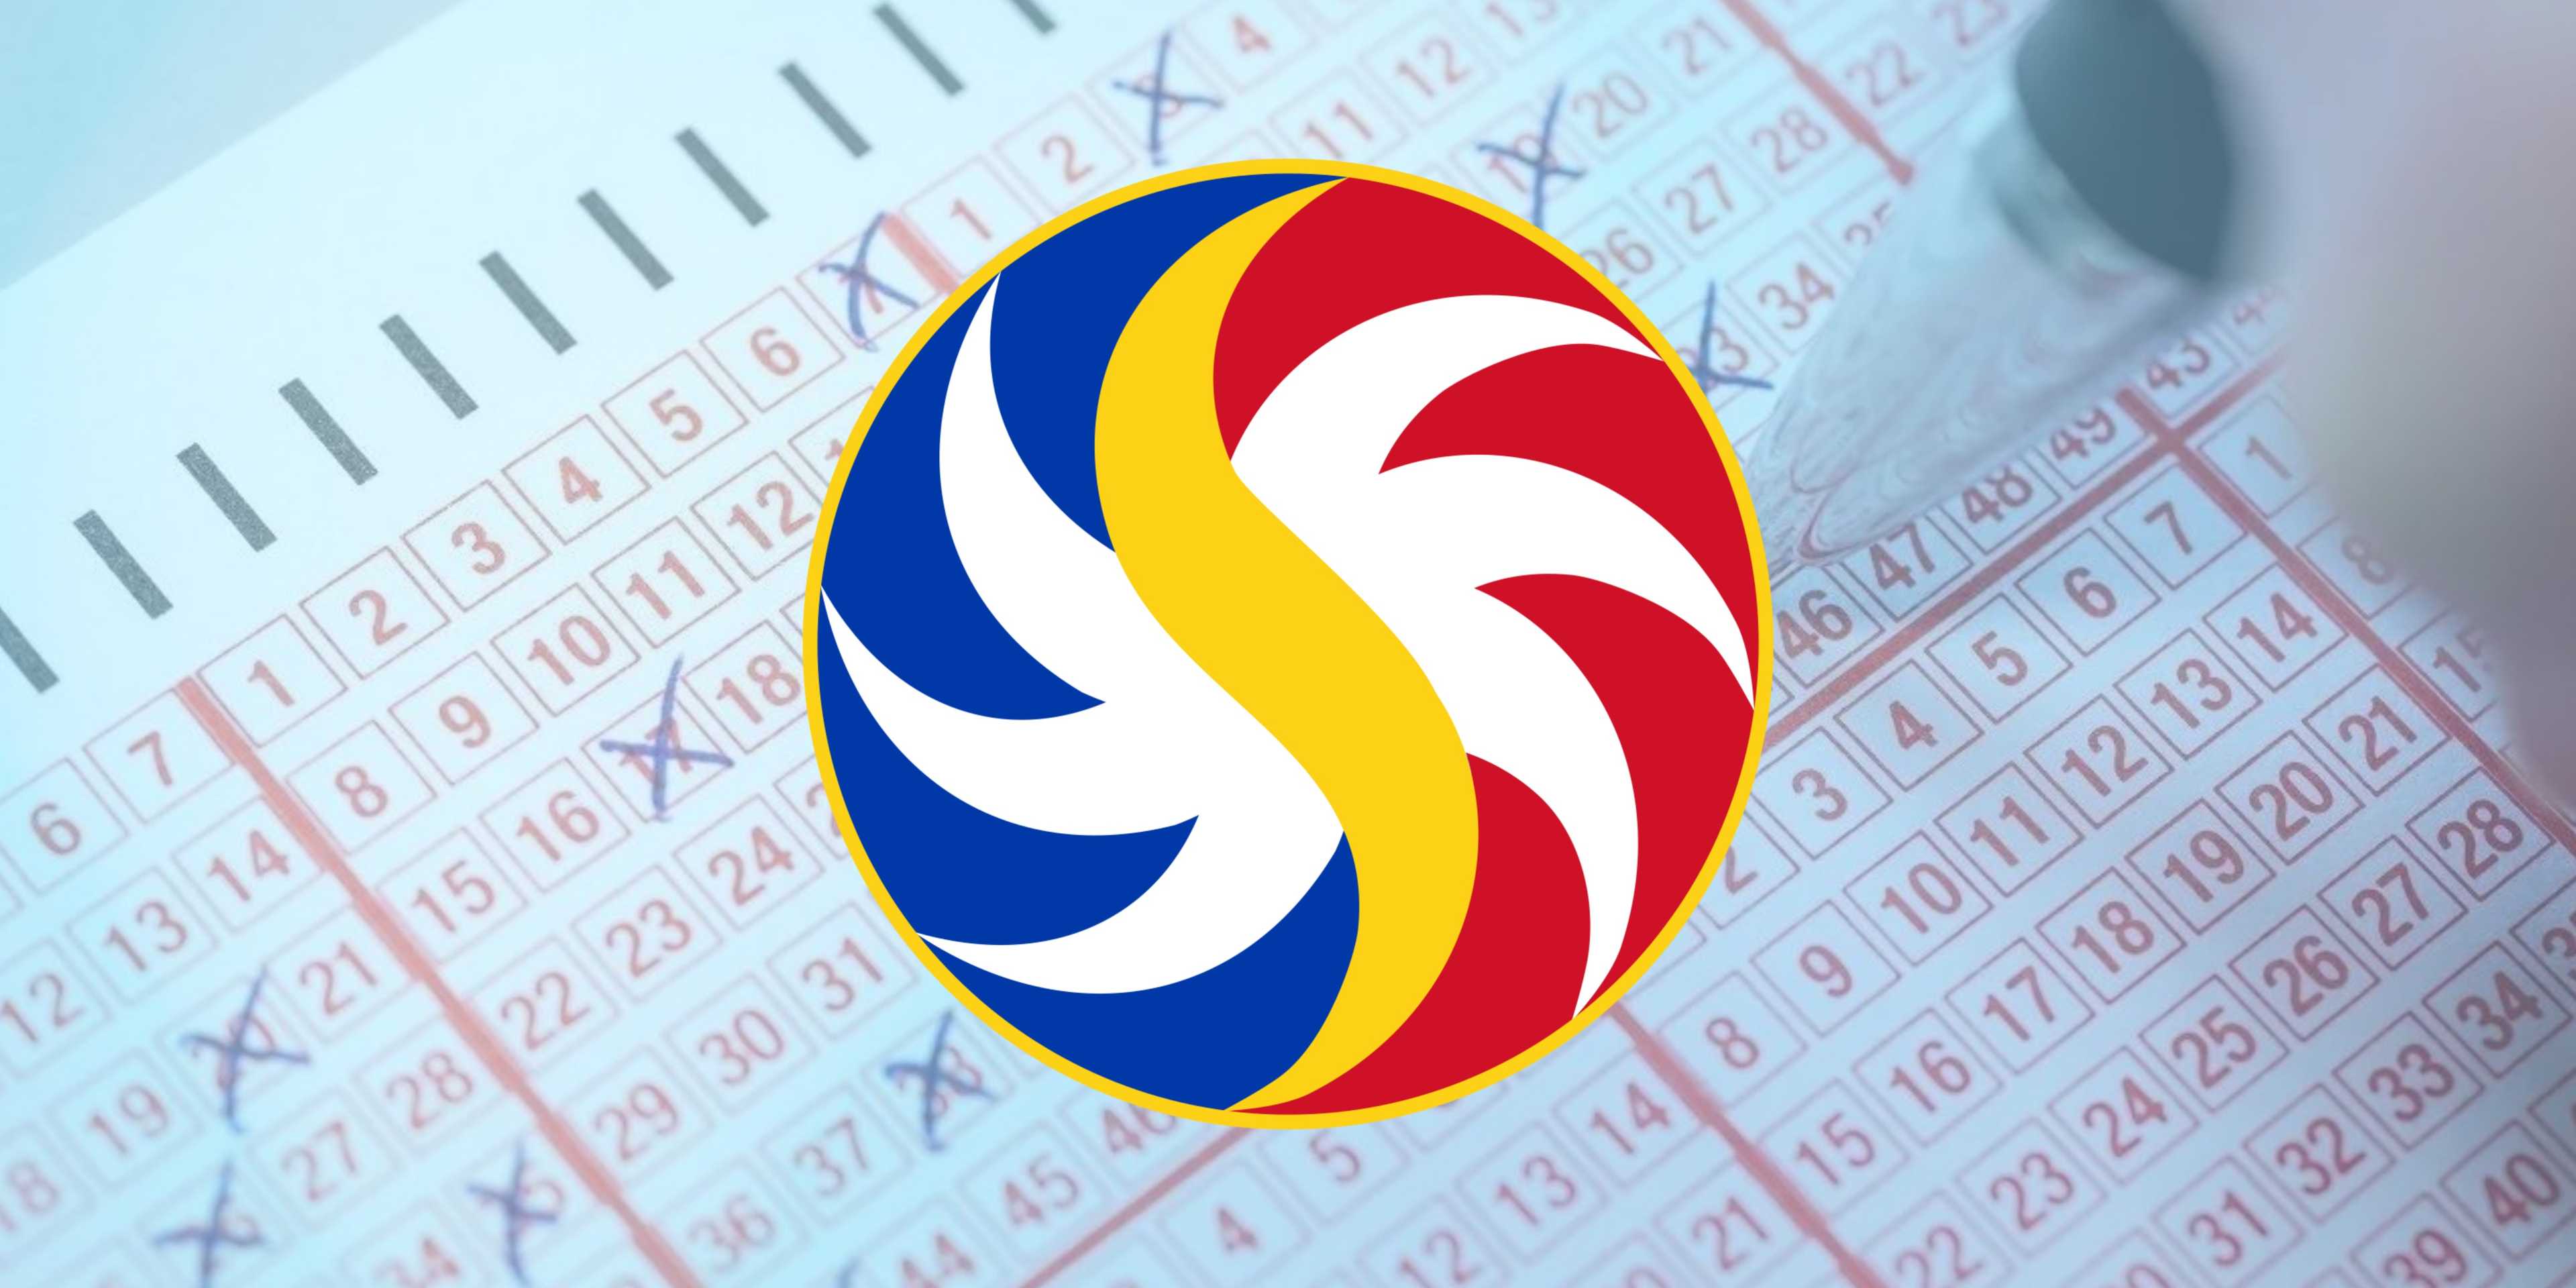 PCSO Lotto Draw Results on Tuesday, March 12